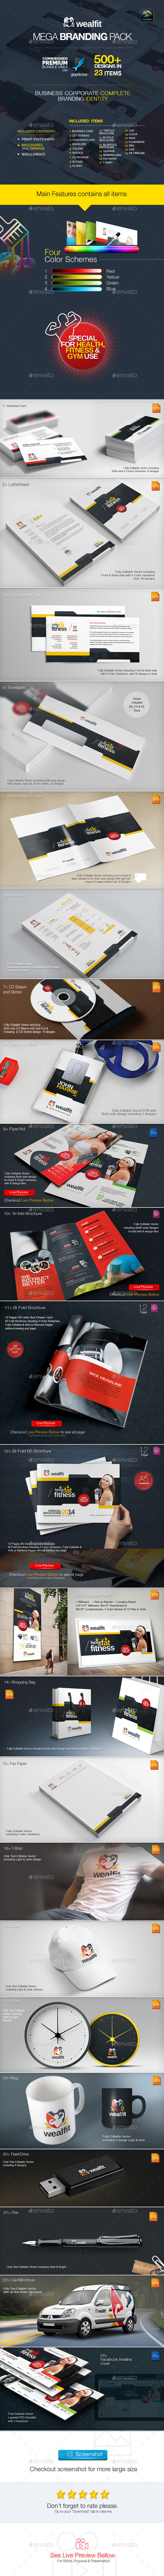 Graphicriver fitness gym weight lose physical fit business branding presentation web banner flyer brochure identity stationery print pack ip